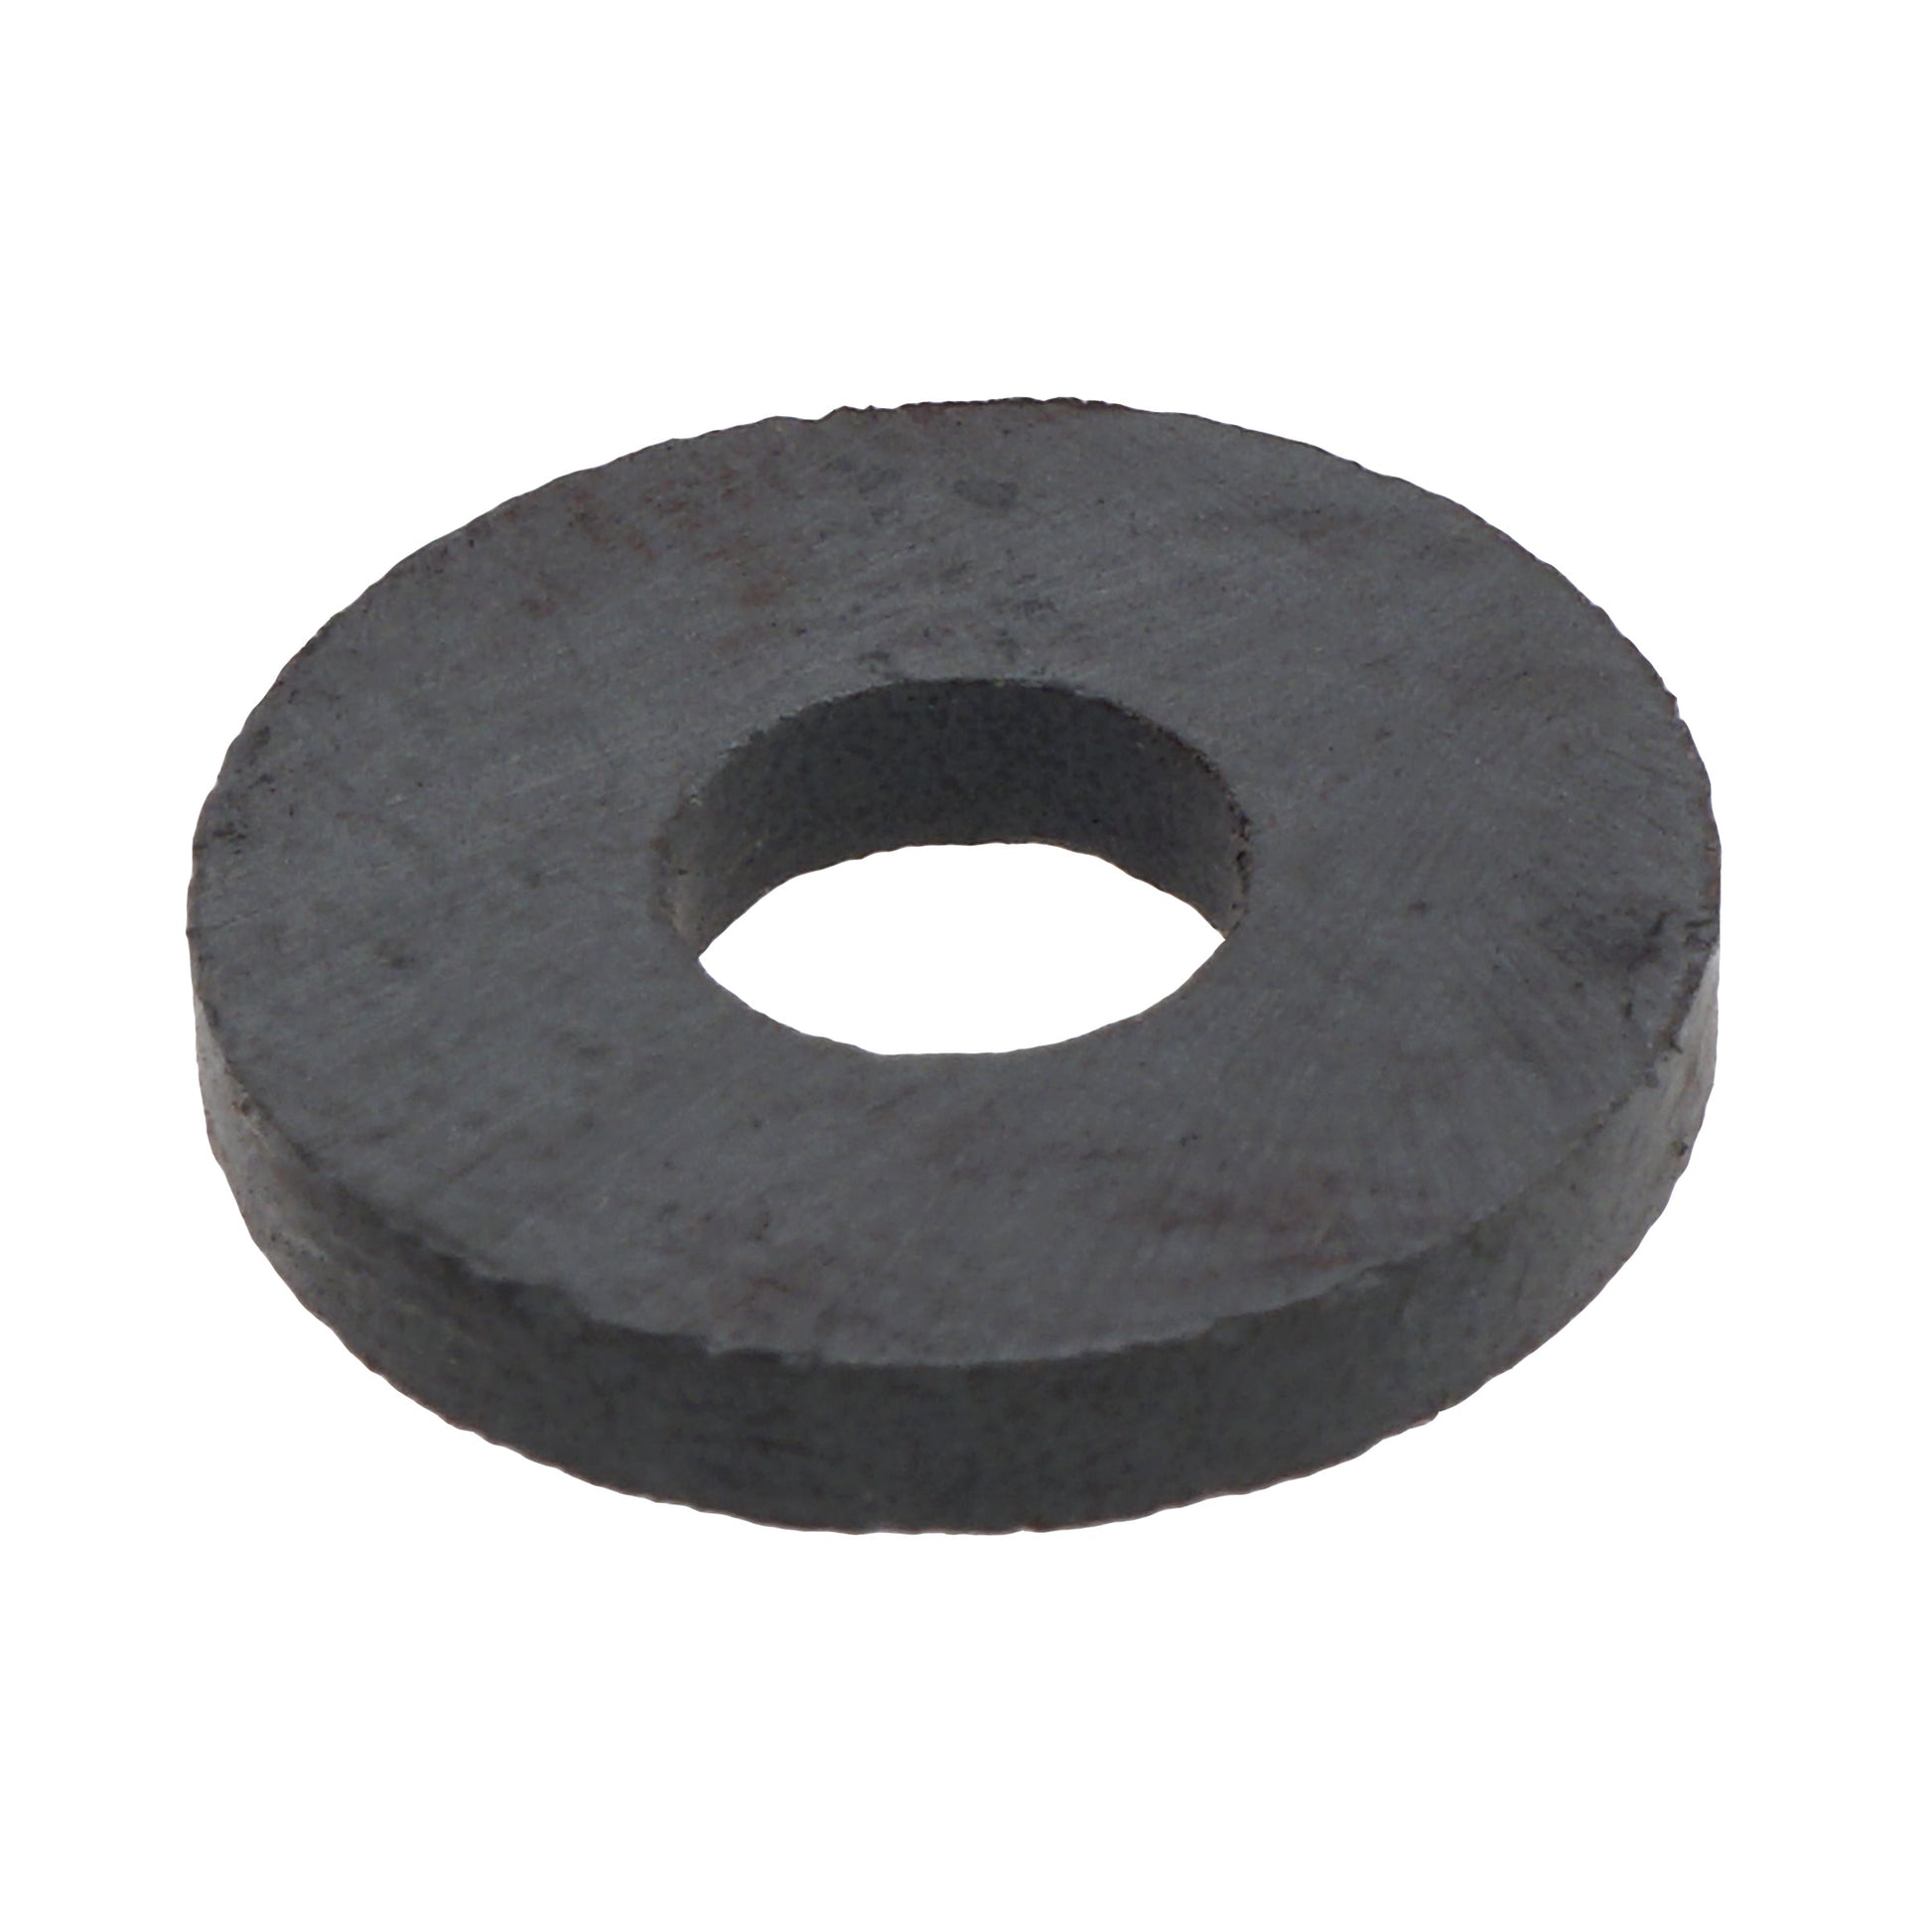 Load image into Gallery viewer, CR551209098 Ceramic Ring Magnet - 45 Degree Angle View